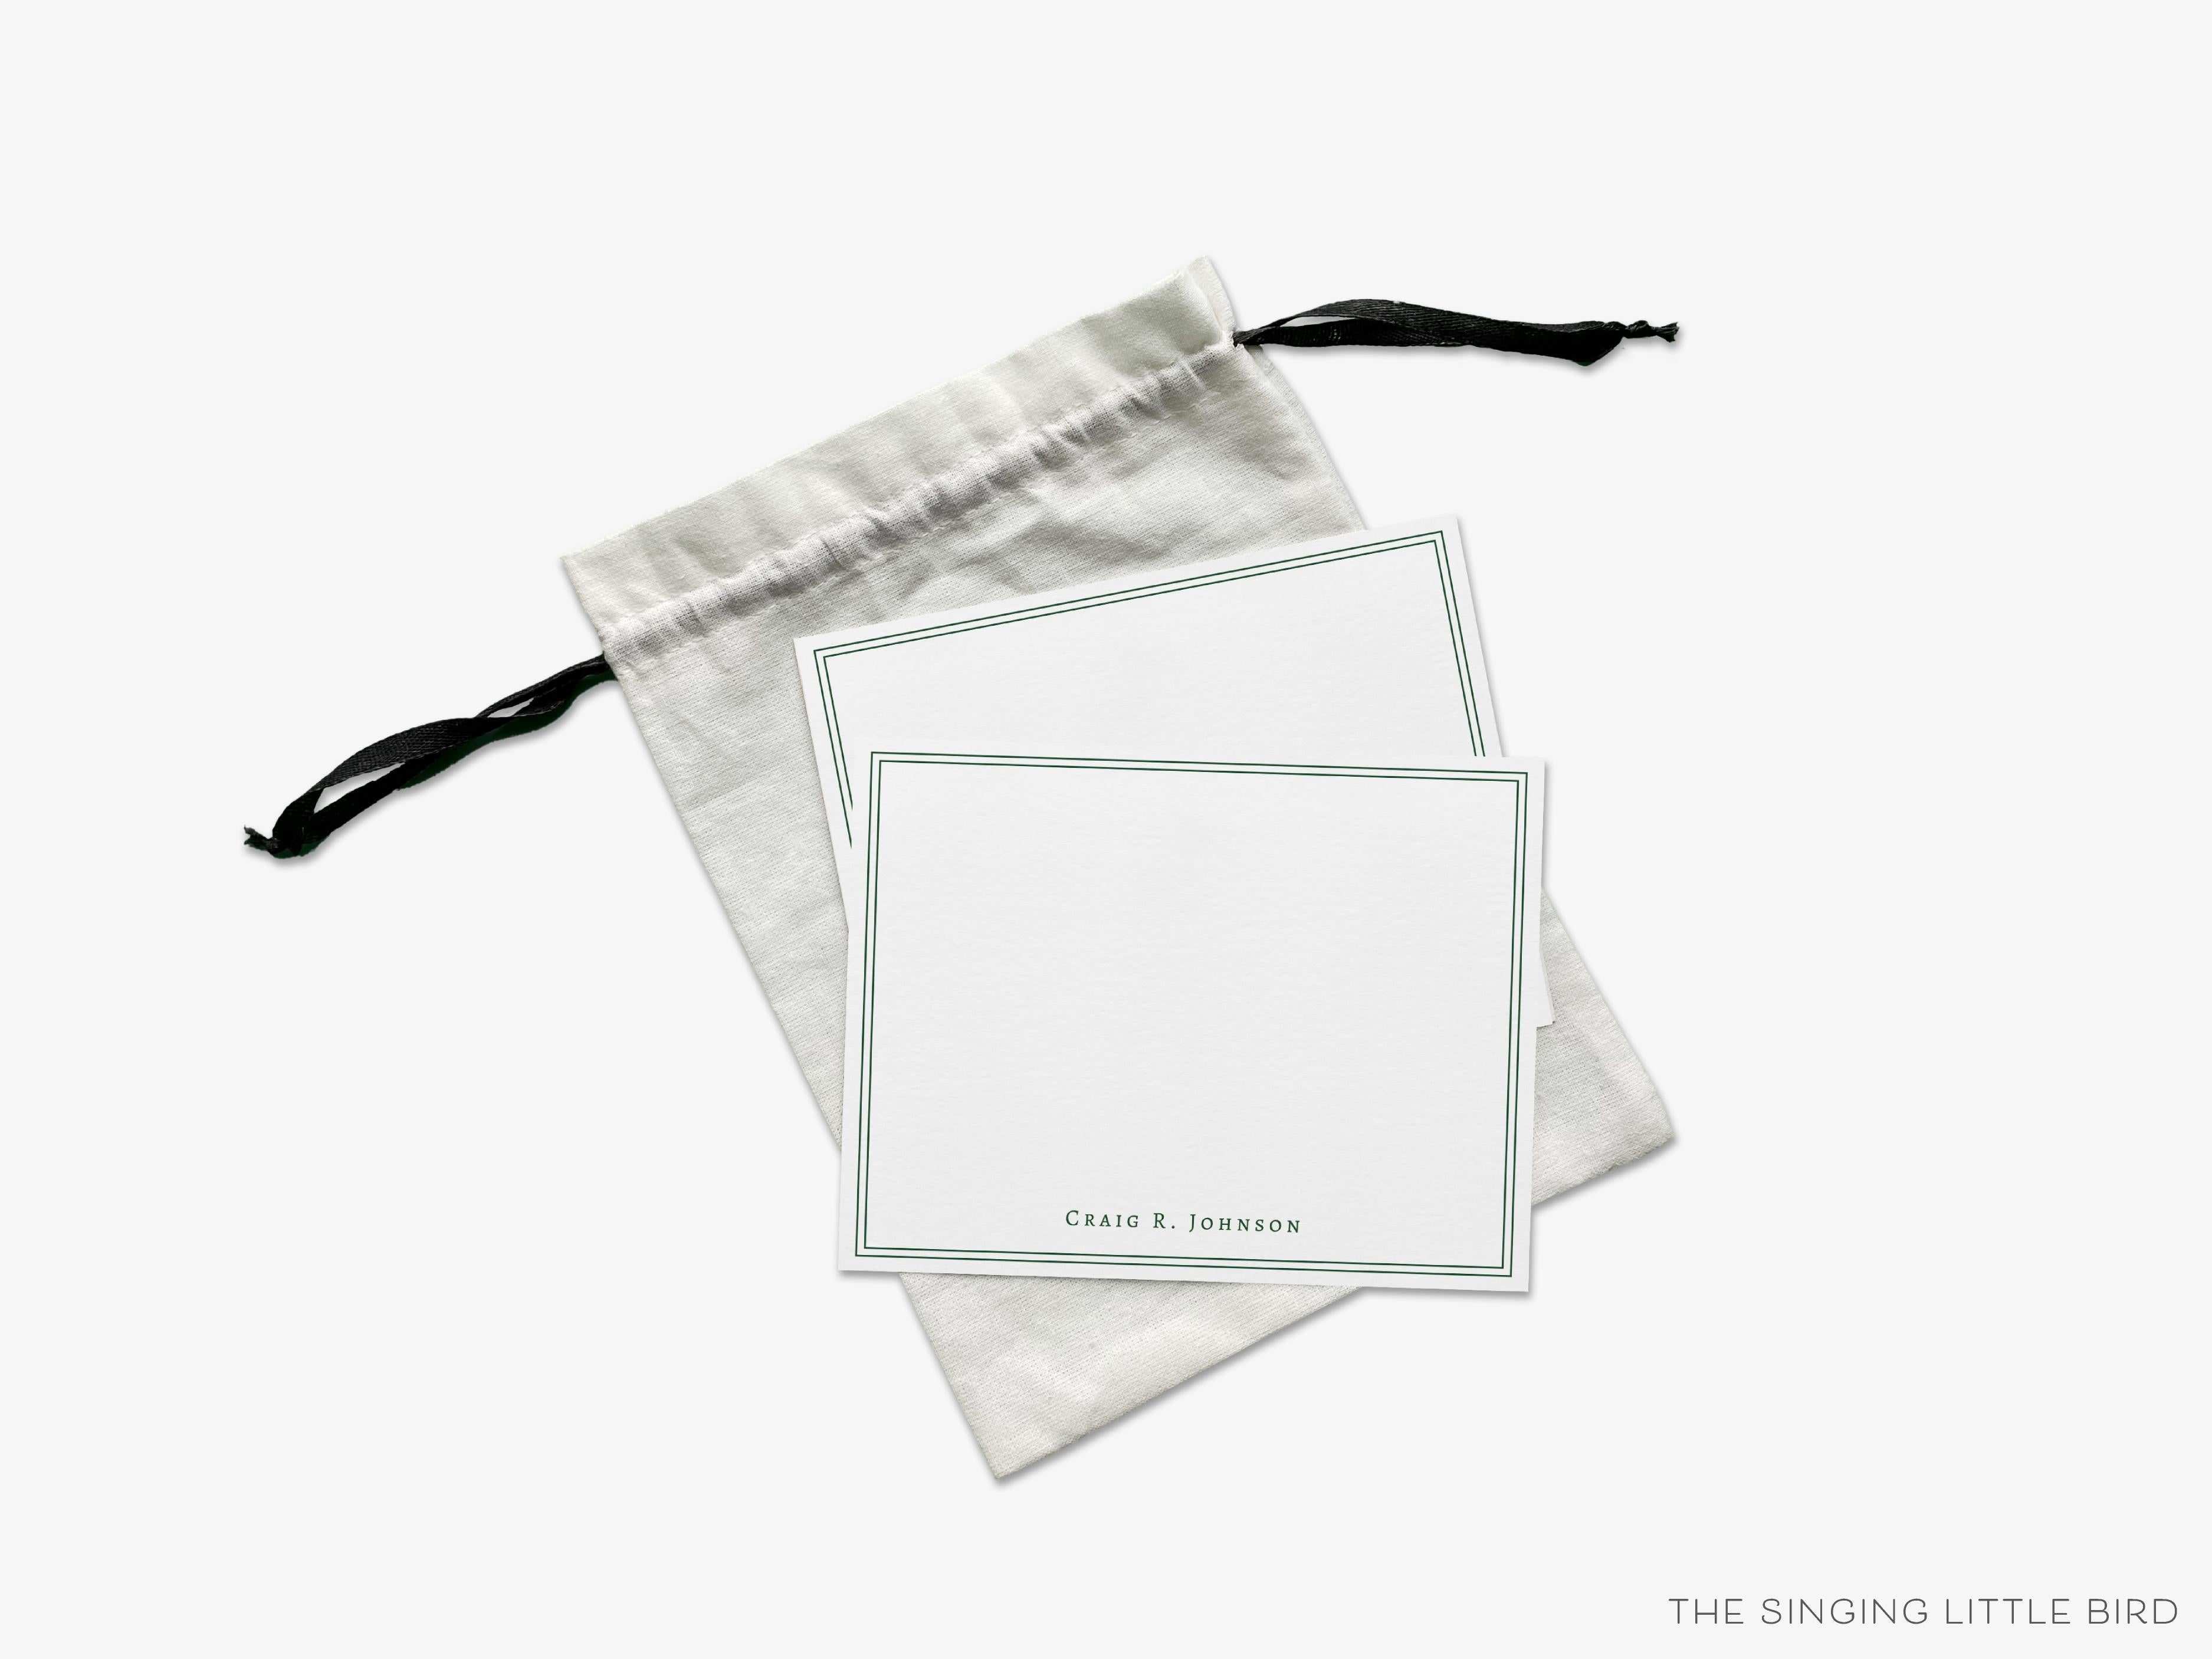 Men's Personalized Flat Notes-These personalized flat notecards are 4.25x5.5 and feature simple text and border, printed in the USA on 120lb textured stock. They come with your choice of envelopes and make great thank yous and gifts for the modern lover in your life.-The Singing Little Bird